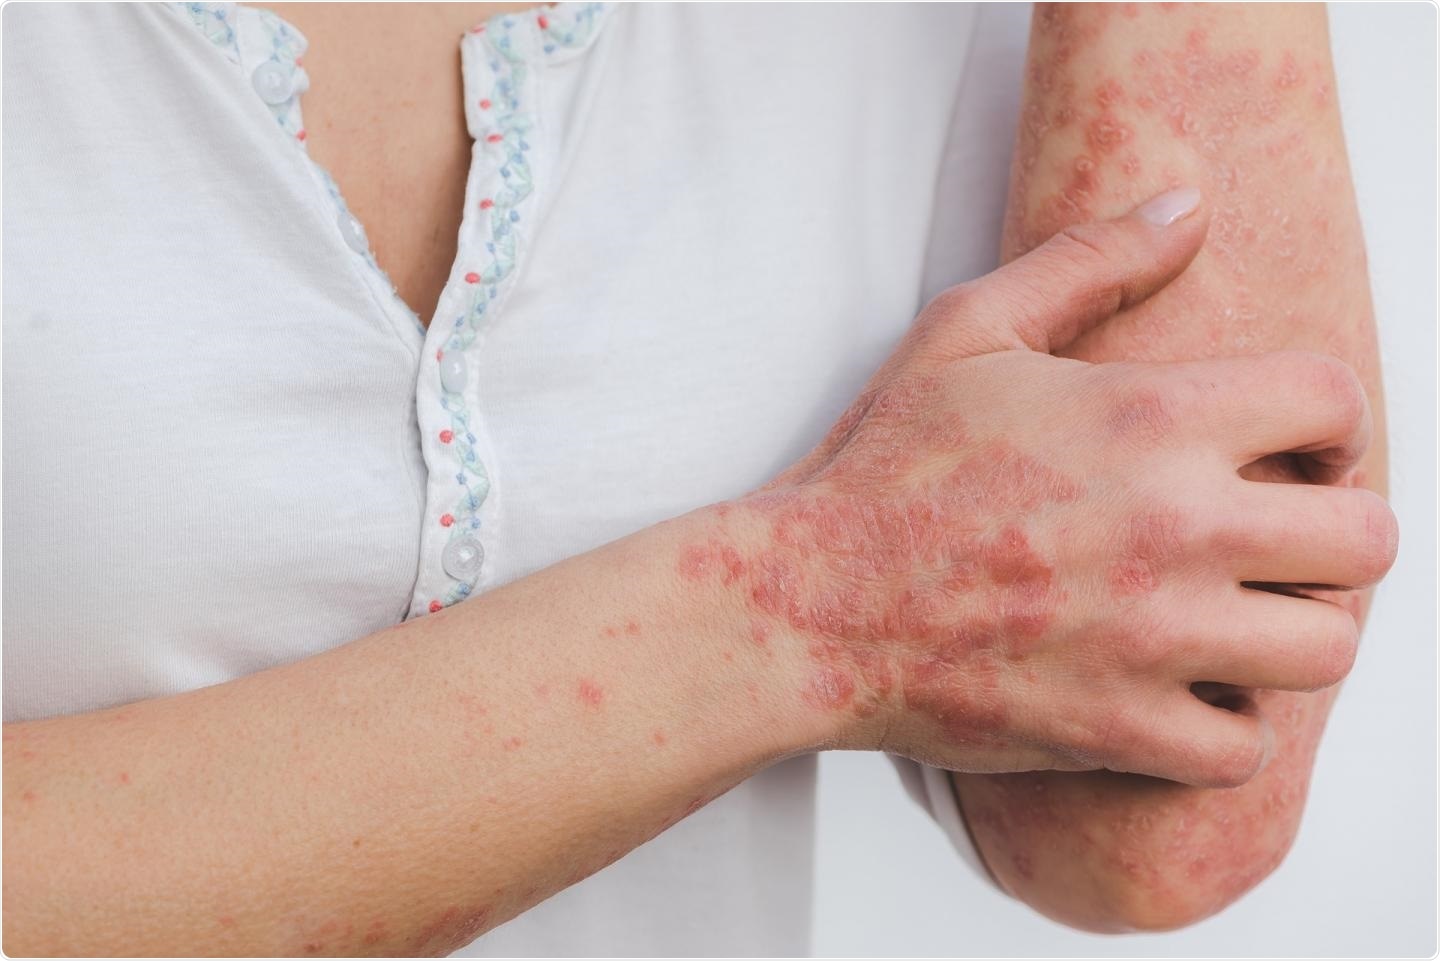 Study explains the link between psoriasis treatment and cardiovascular diseases